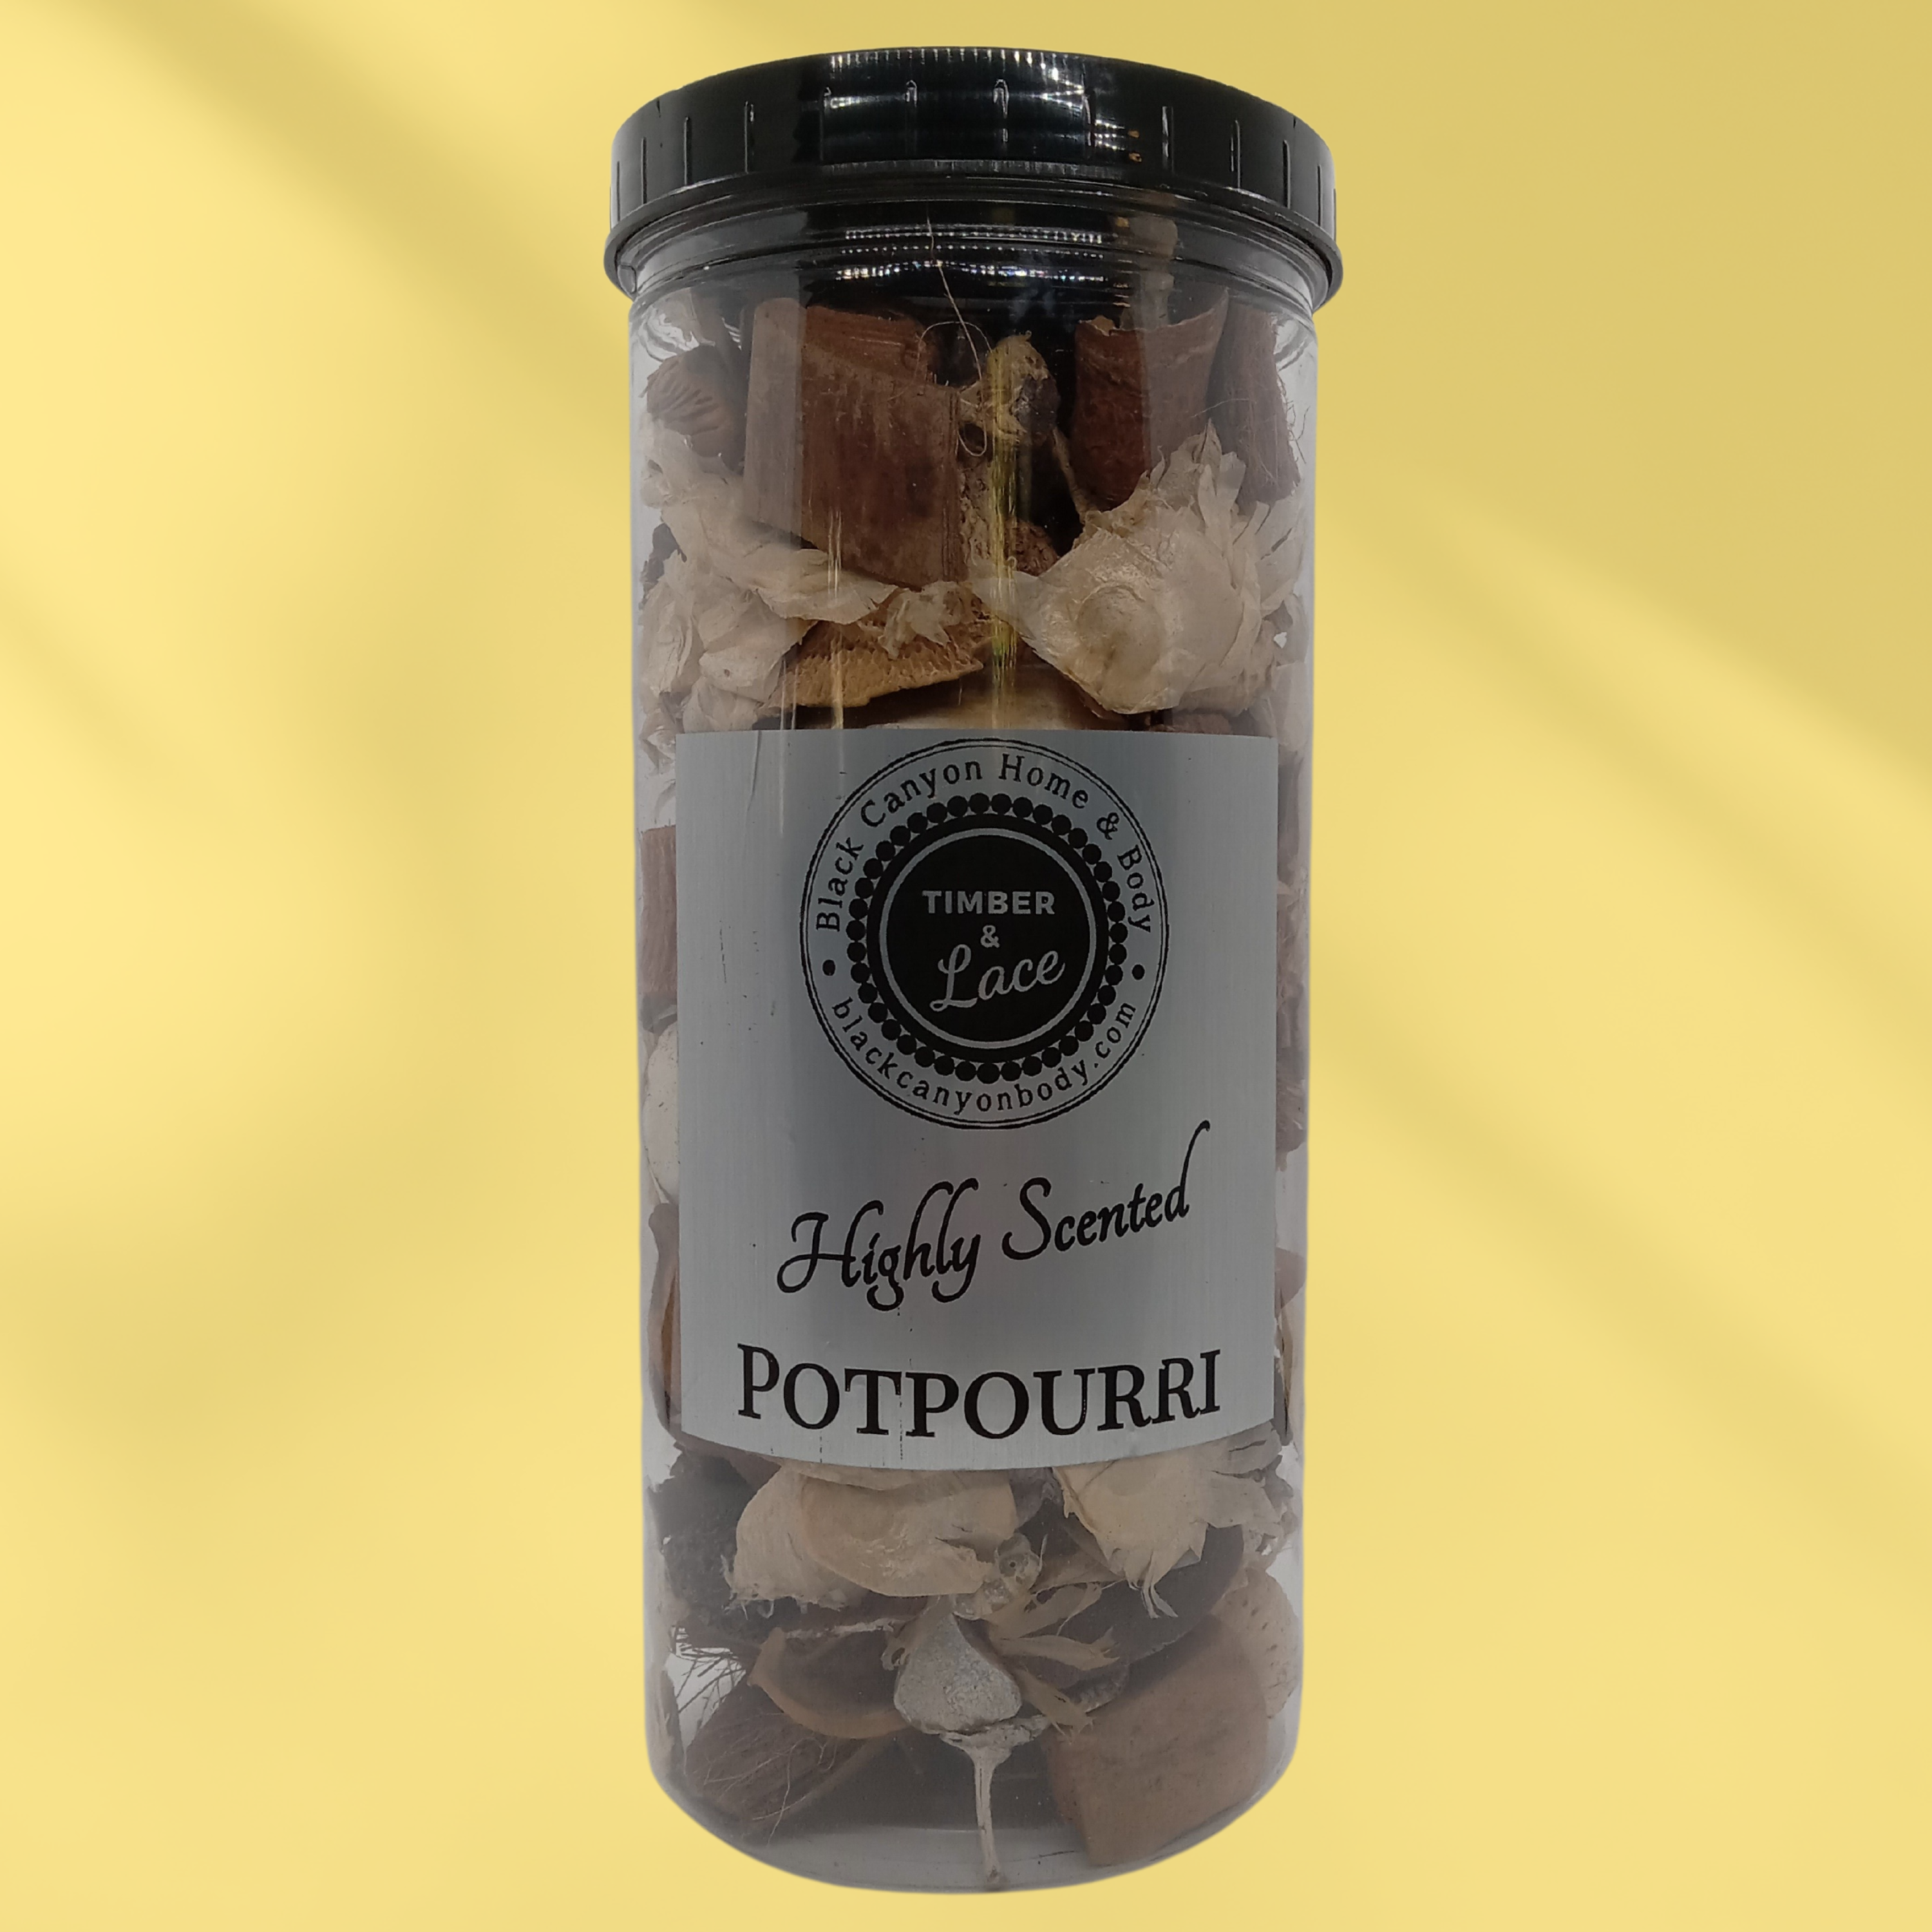 Timber & Lace Peanut Butter Cups Scented Potpourri